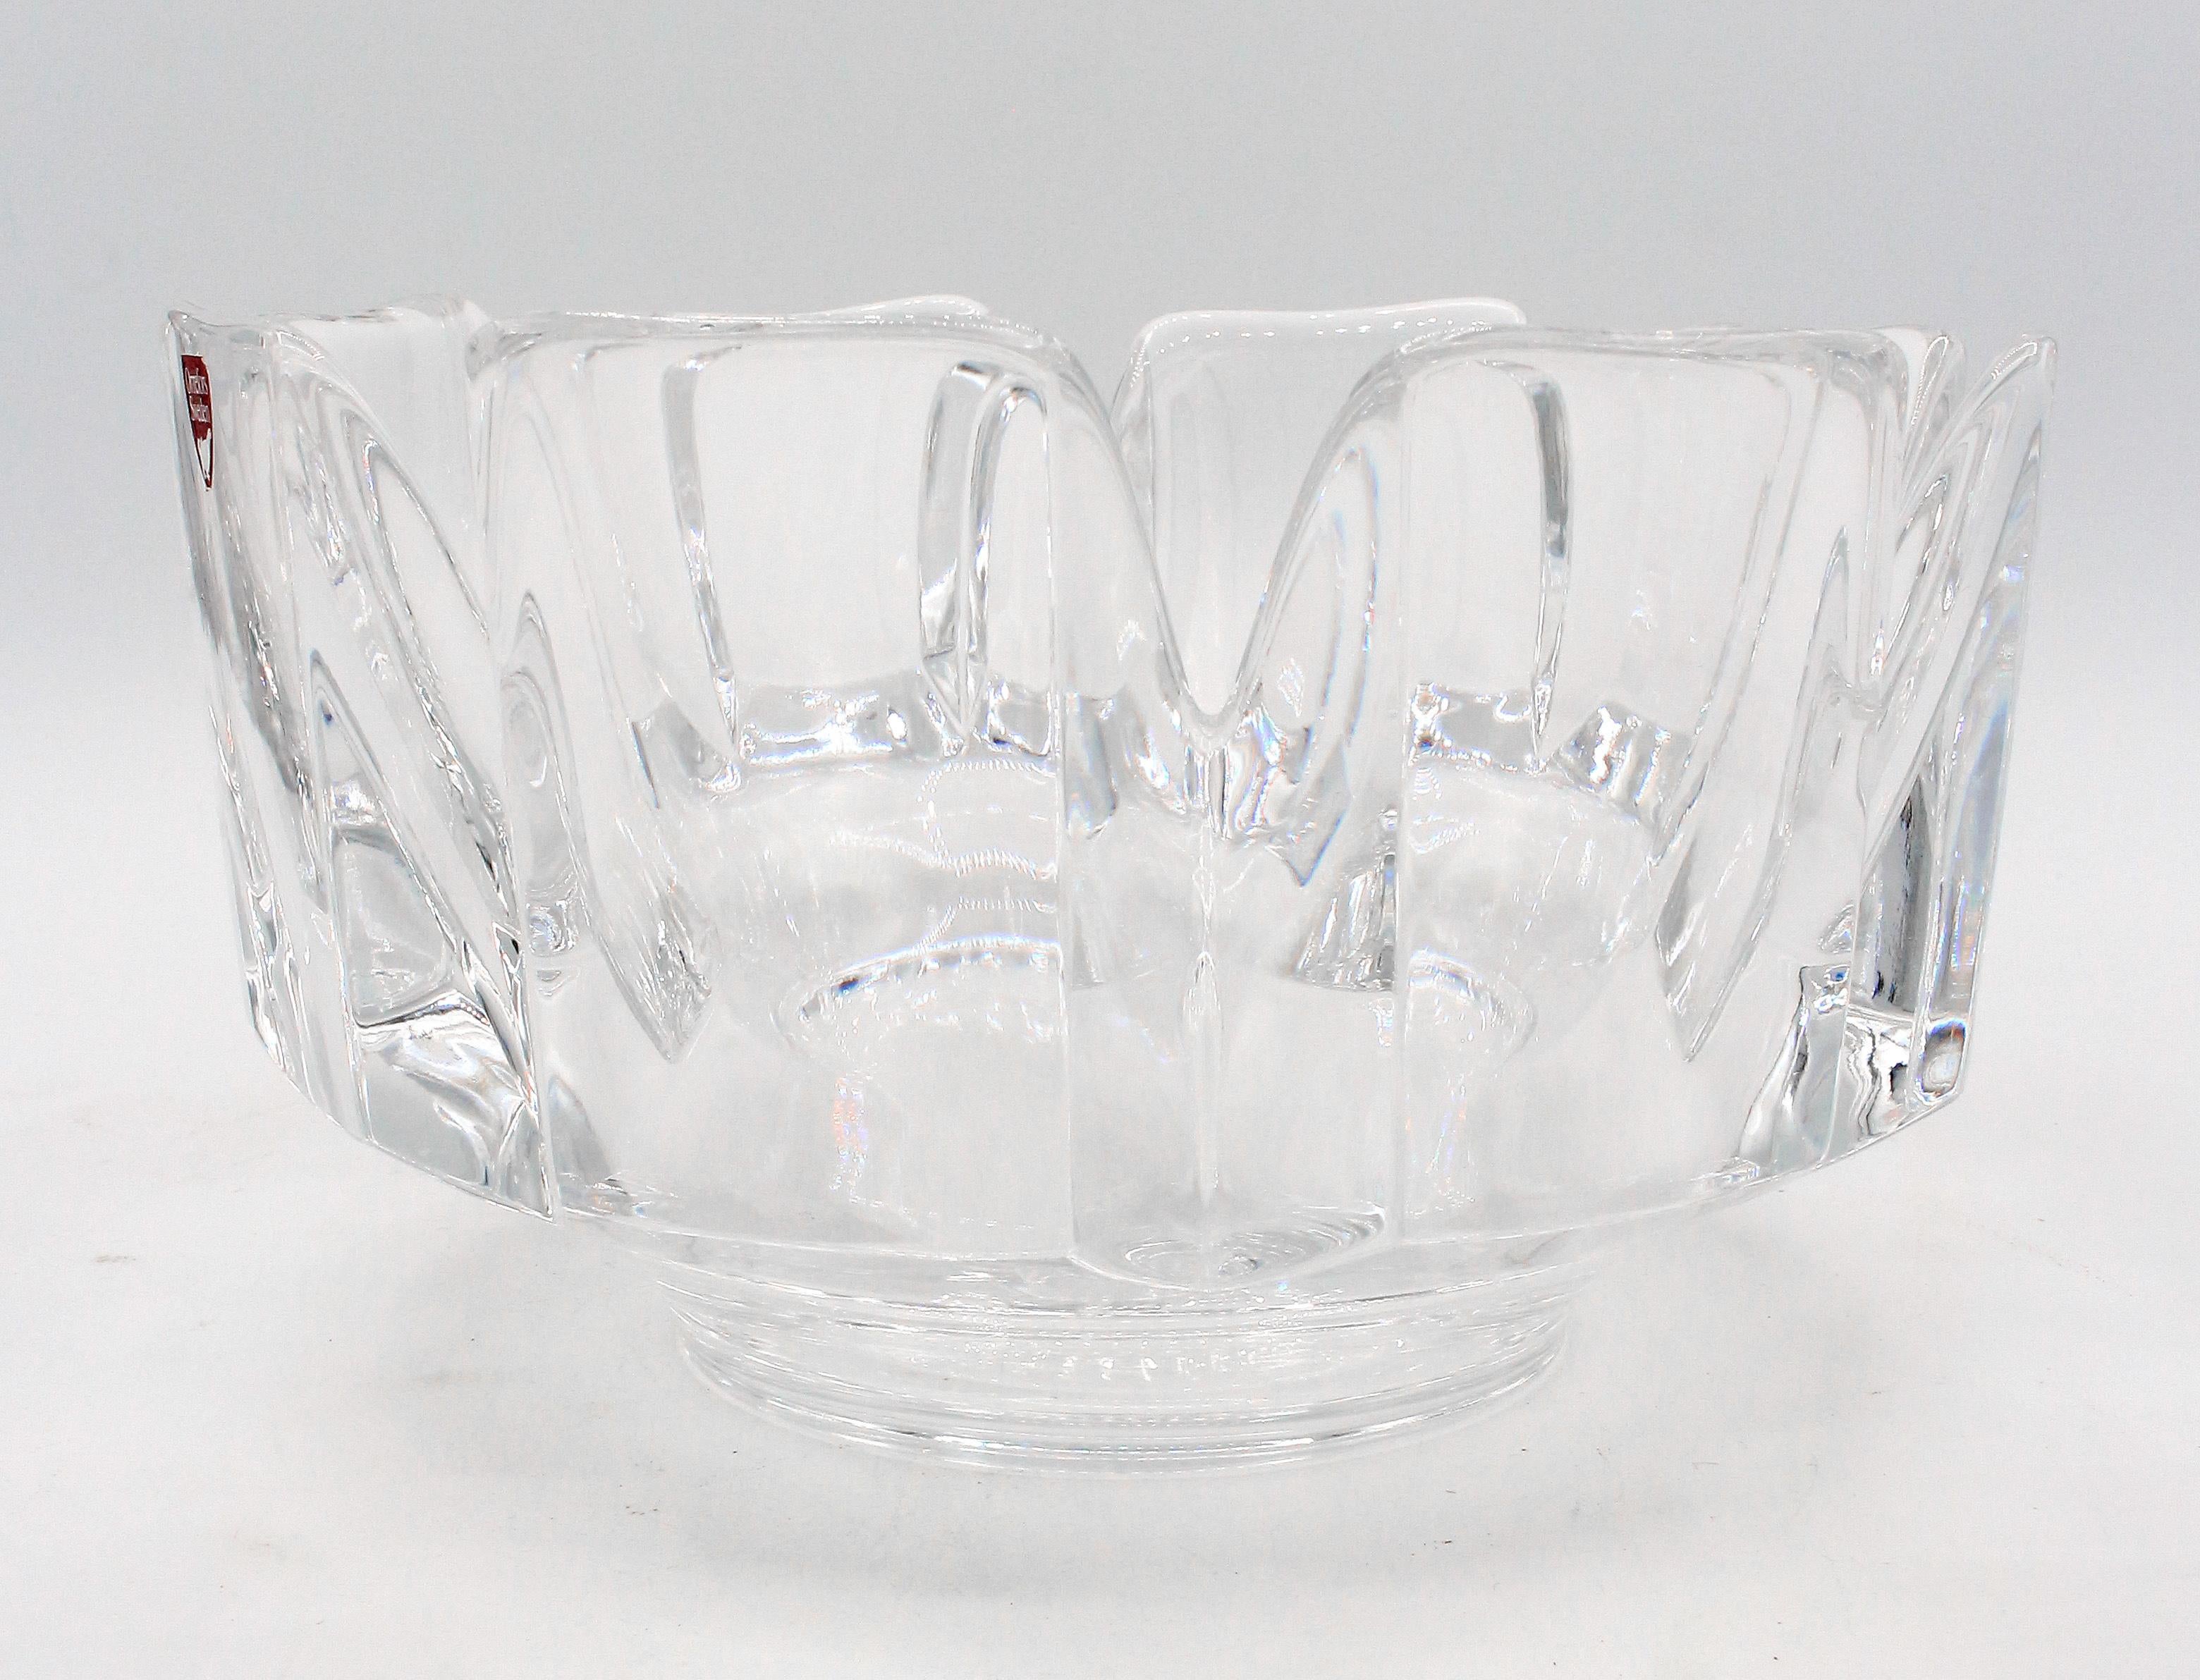 Mid Century Modern glass bowl by Orrefors, circa 1960s, designed by Lars Hellsten. 8 petal bowl known as the Corona bowl. Retains label: Orrefors Sweden. Signed: Orrefors, LH4384-131.
7 3/8